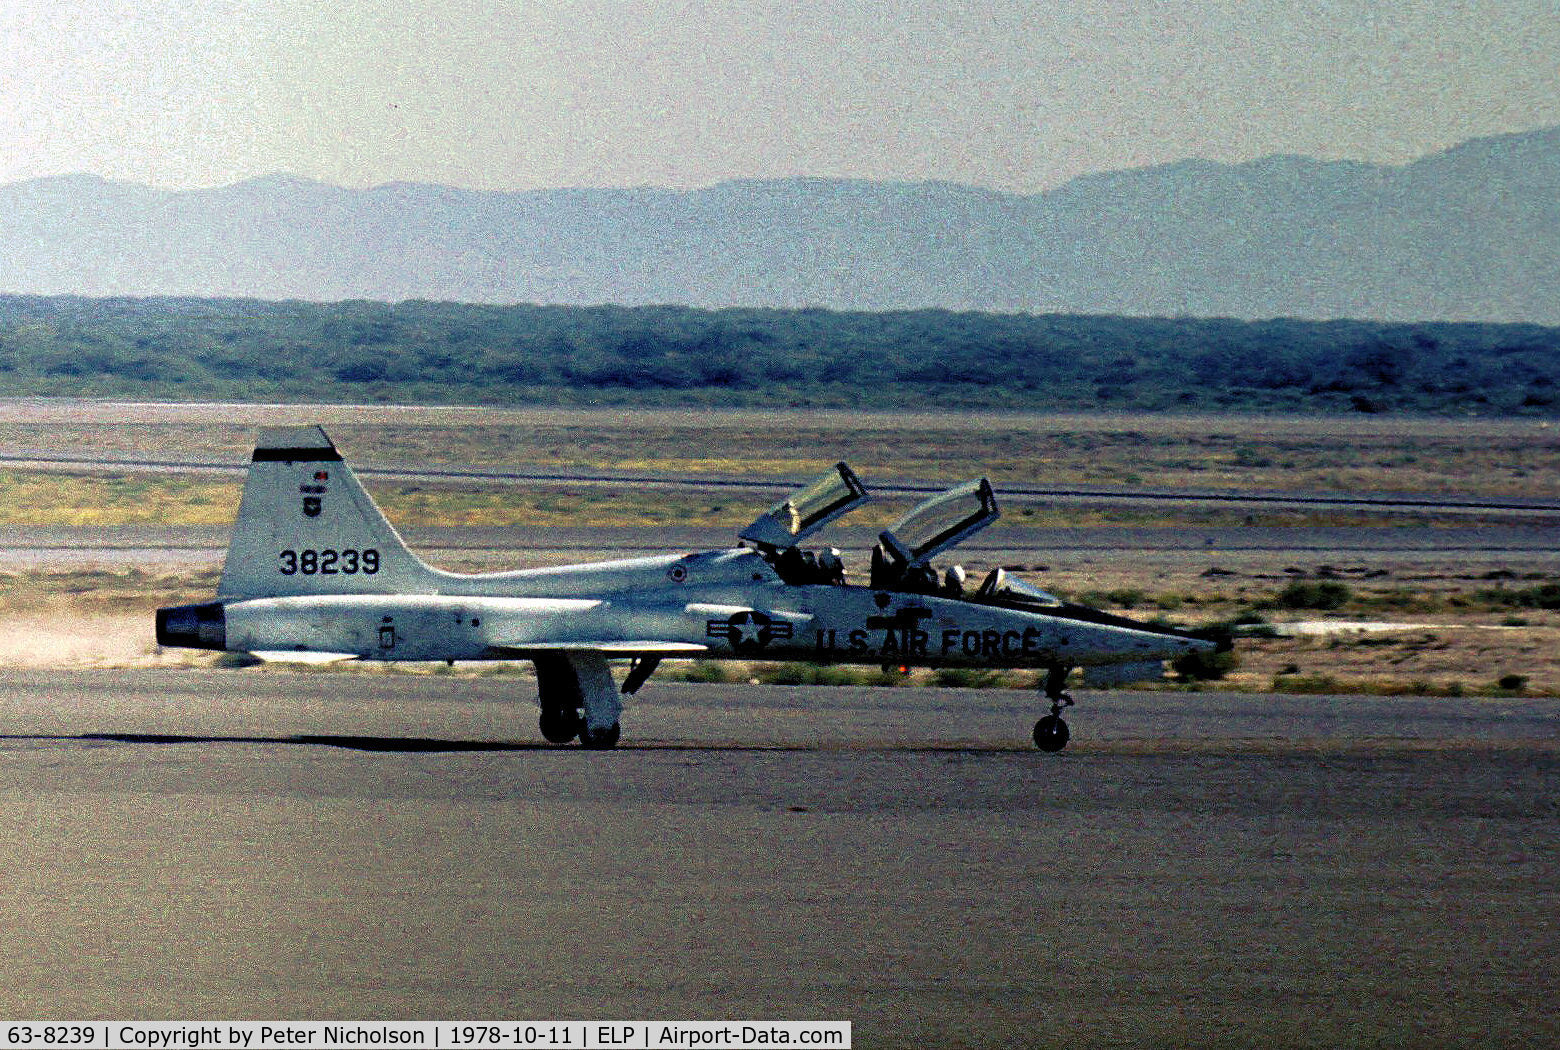 63-8239, 1963 Northrop T-38A Talon C/N N.5586, T-38A Talon of the 47th Flying Training Wing staging through El Paso in October 1978.